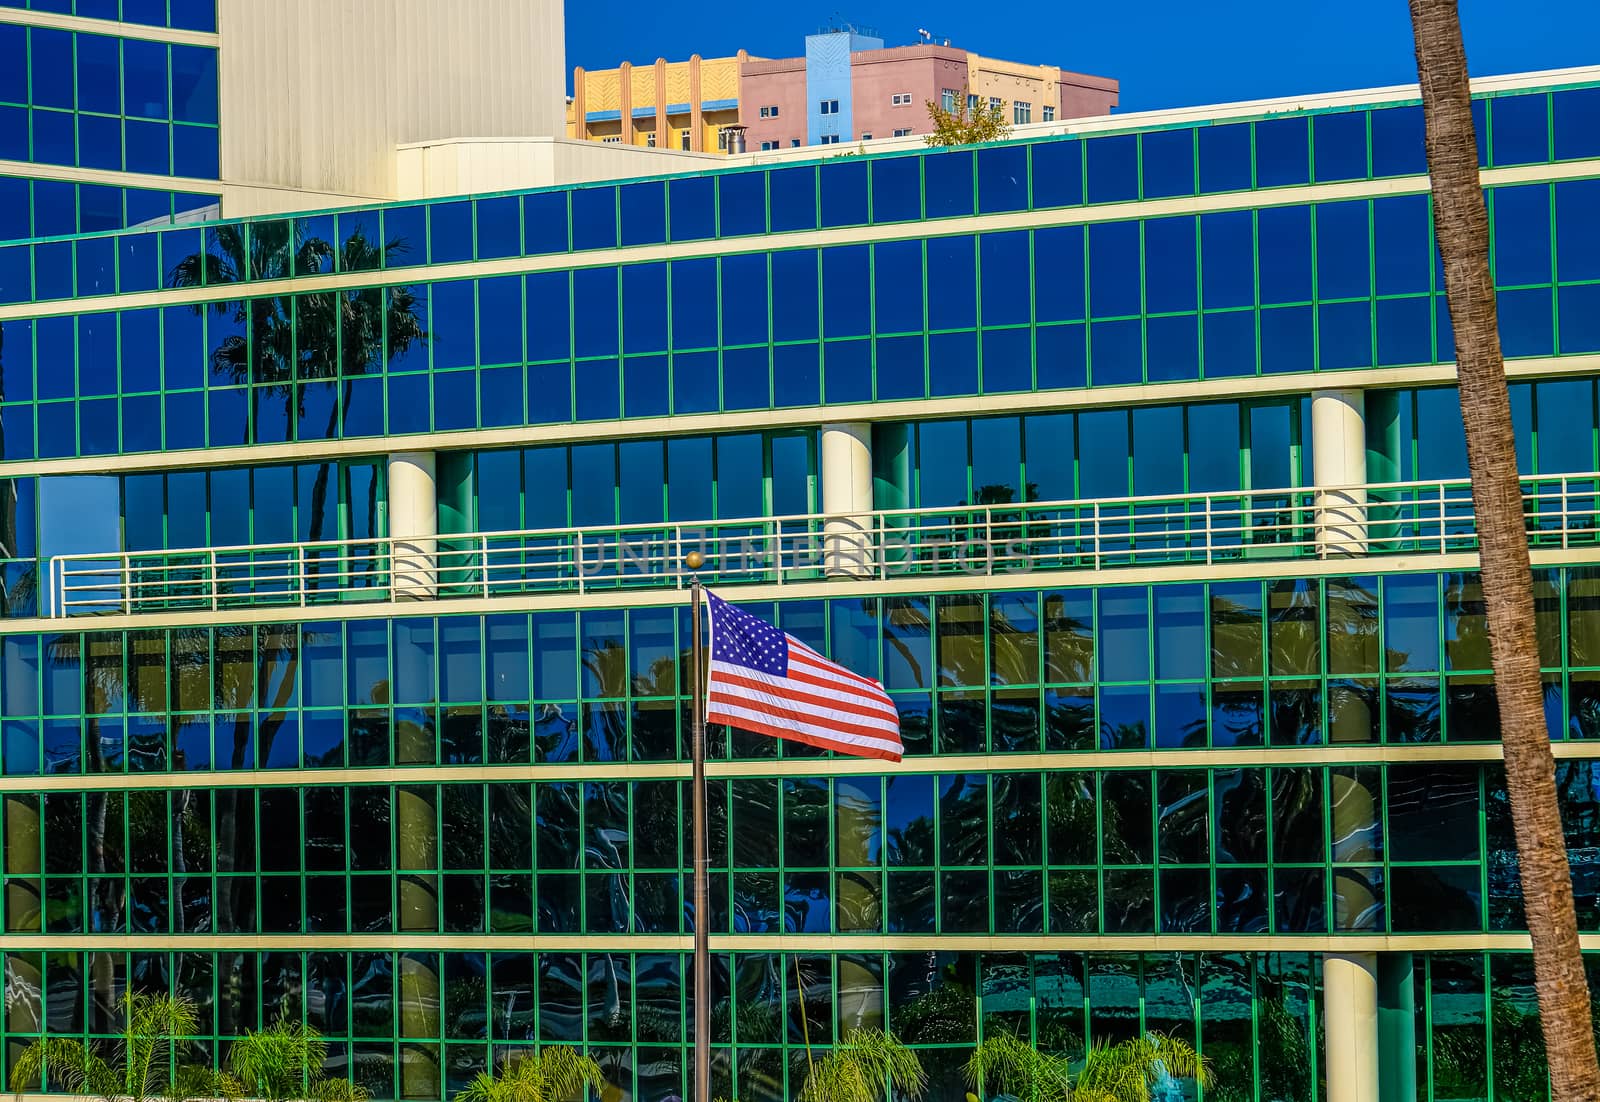 American Flag by Blue Glass Building in Tropical Setting